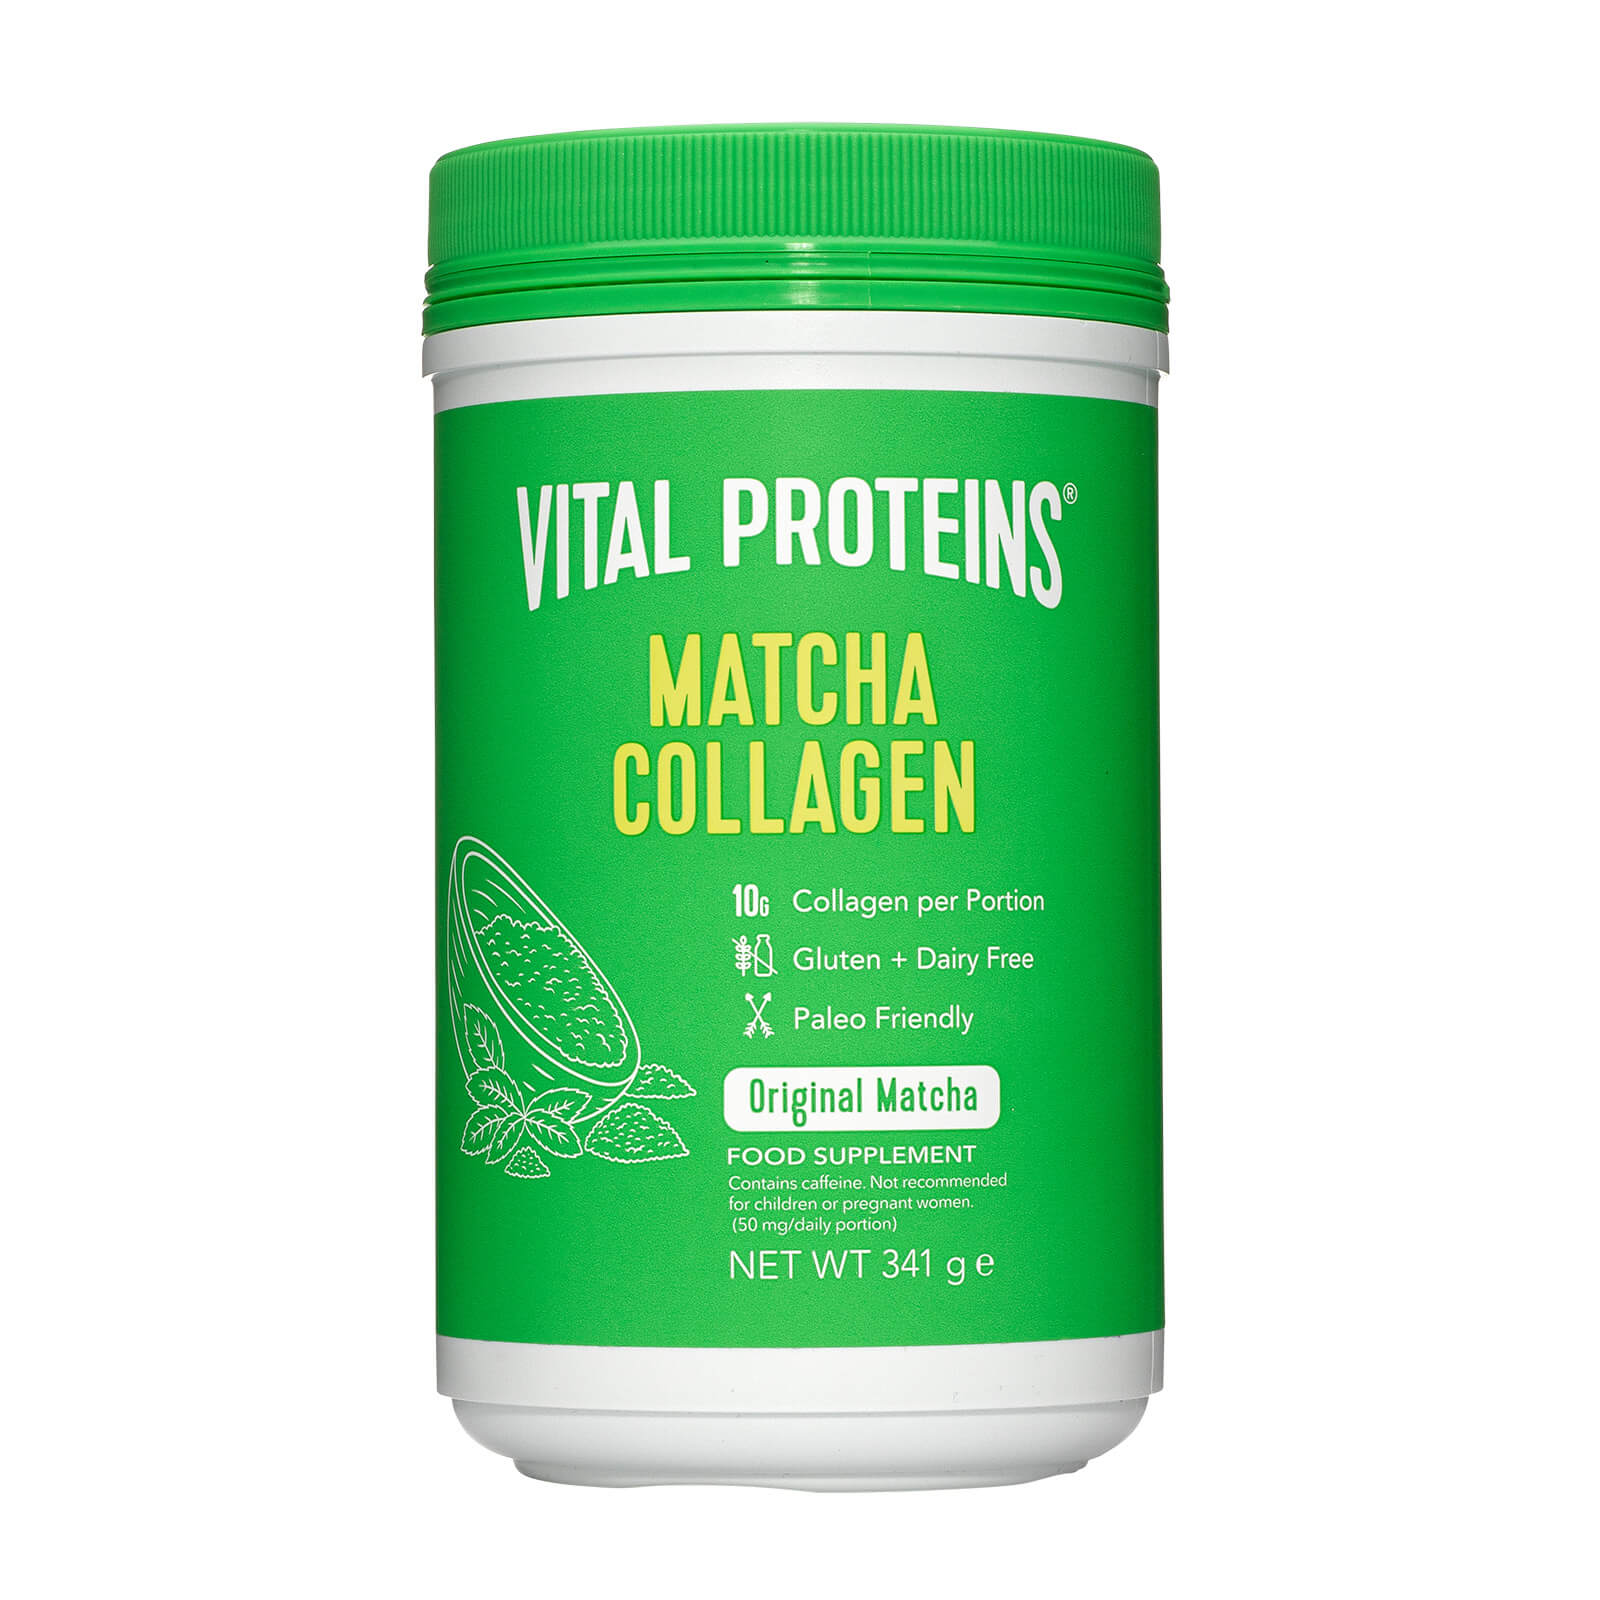 Matcha Collagen - 12oz Subscription - Delivery Every 3 Months